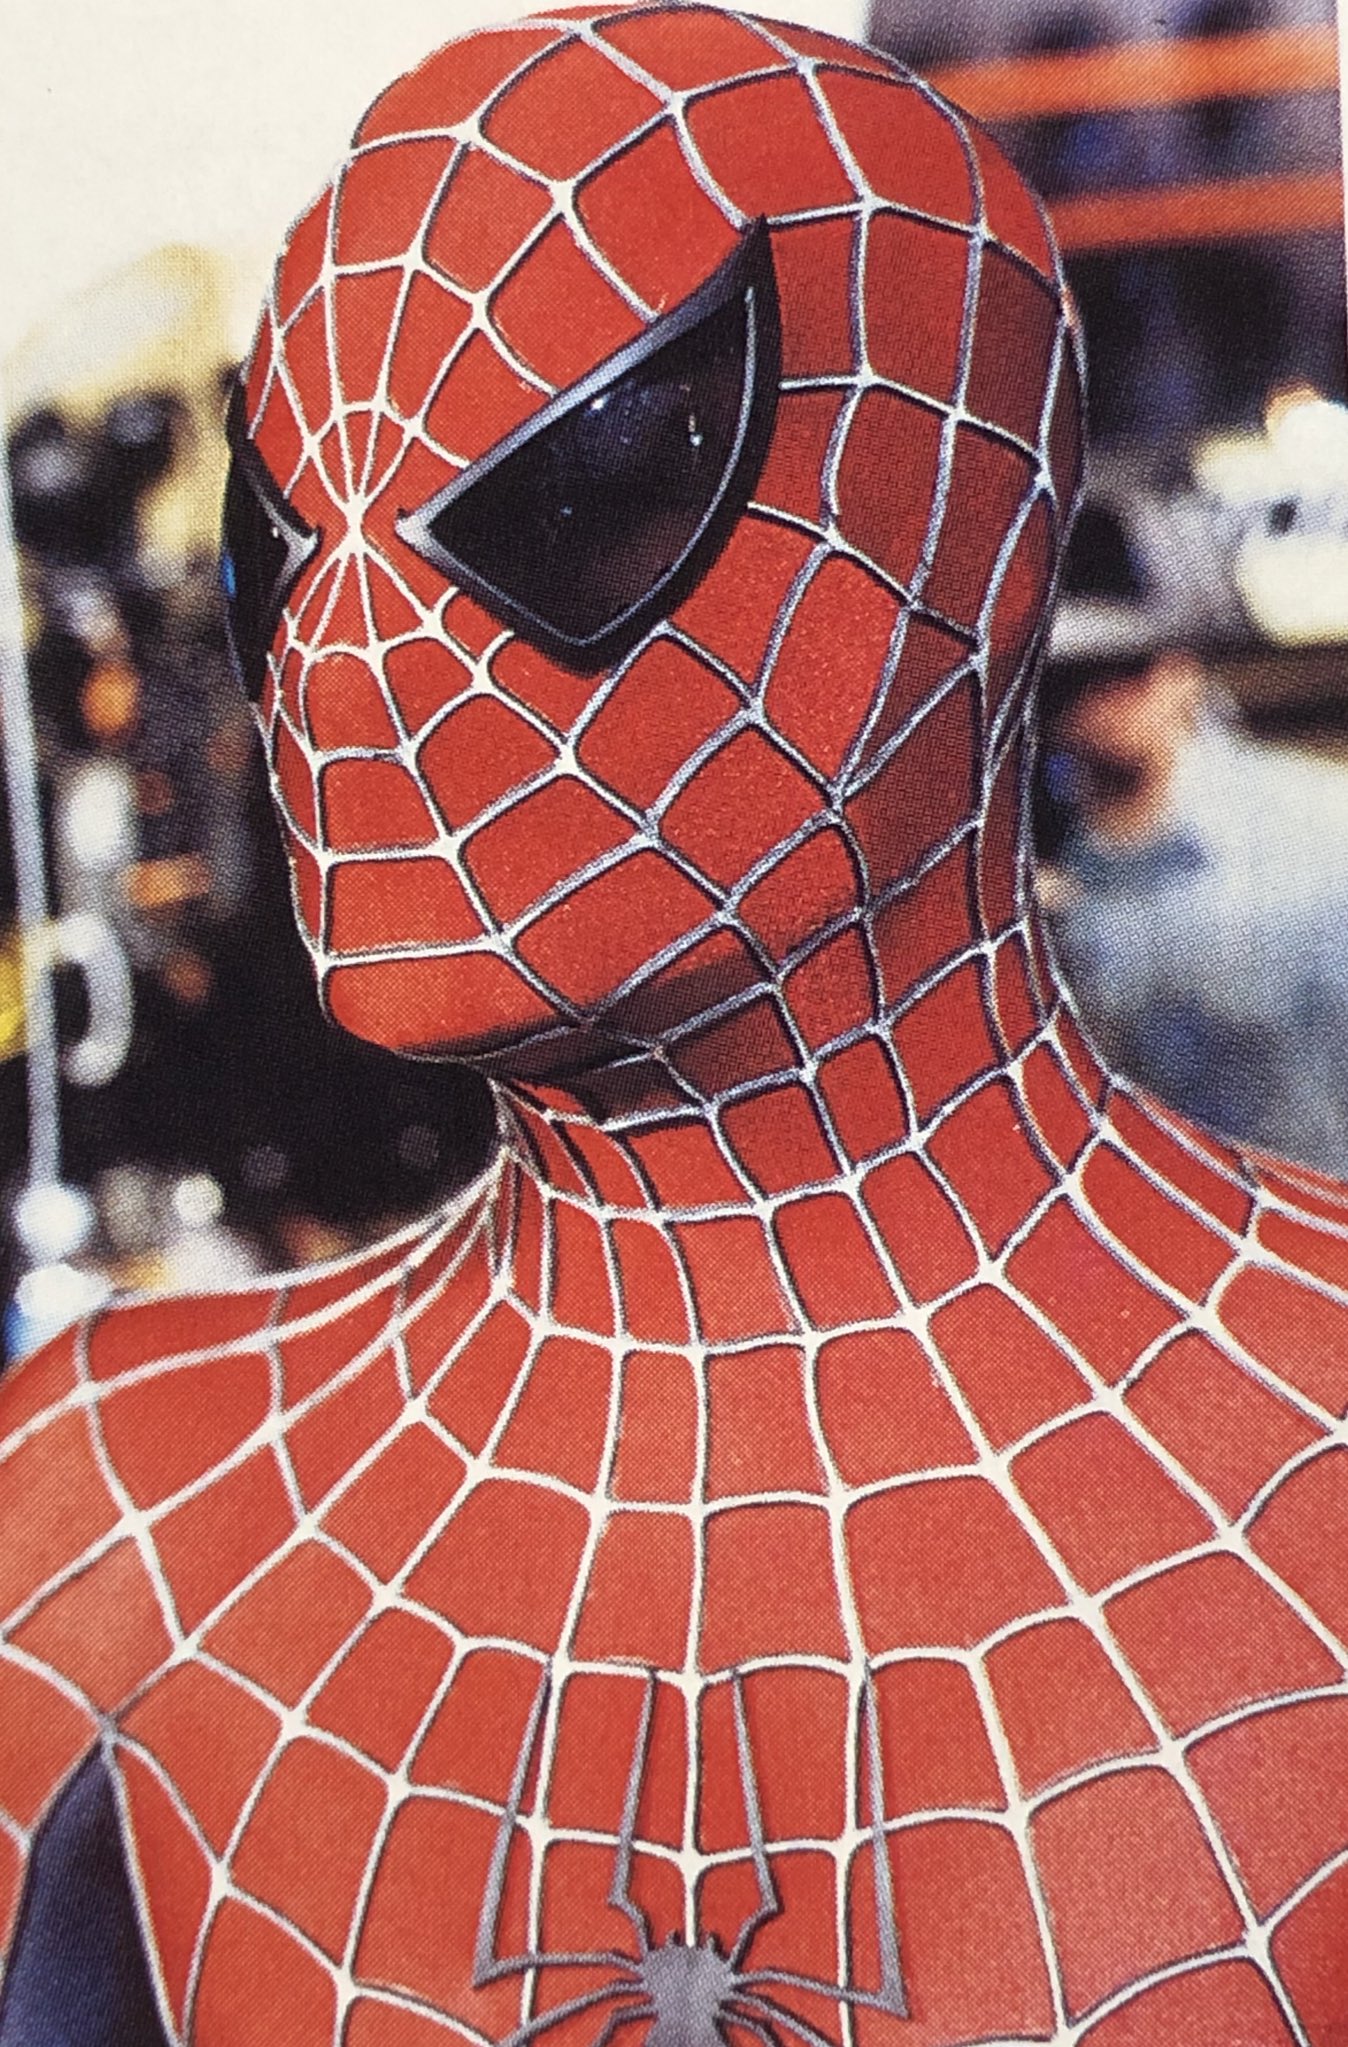 kande hjemmelevering polet All Things Raimi Spider-Man on Twitter: "Spider-Man (2002) Stuntman Mark  Wagner wearing an early version of the suit, sporting Oakley sunglass  eyepieces. These black eyepieces were abandoned in favor of the more